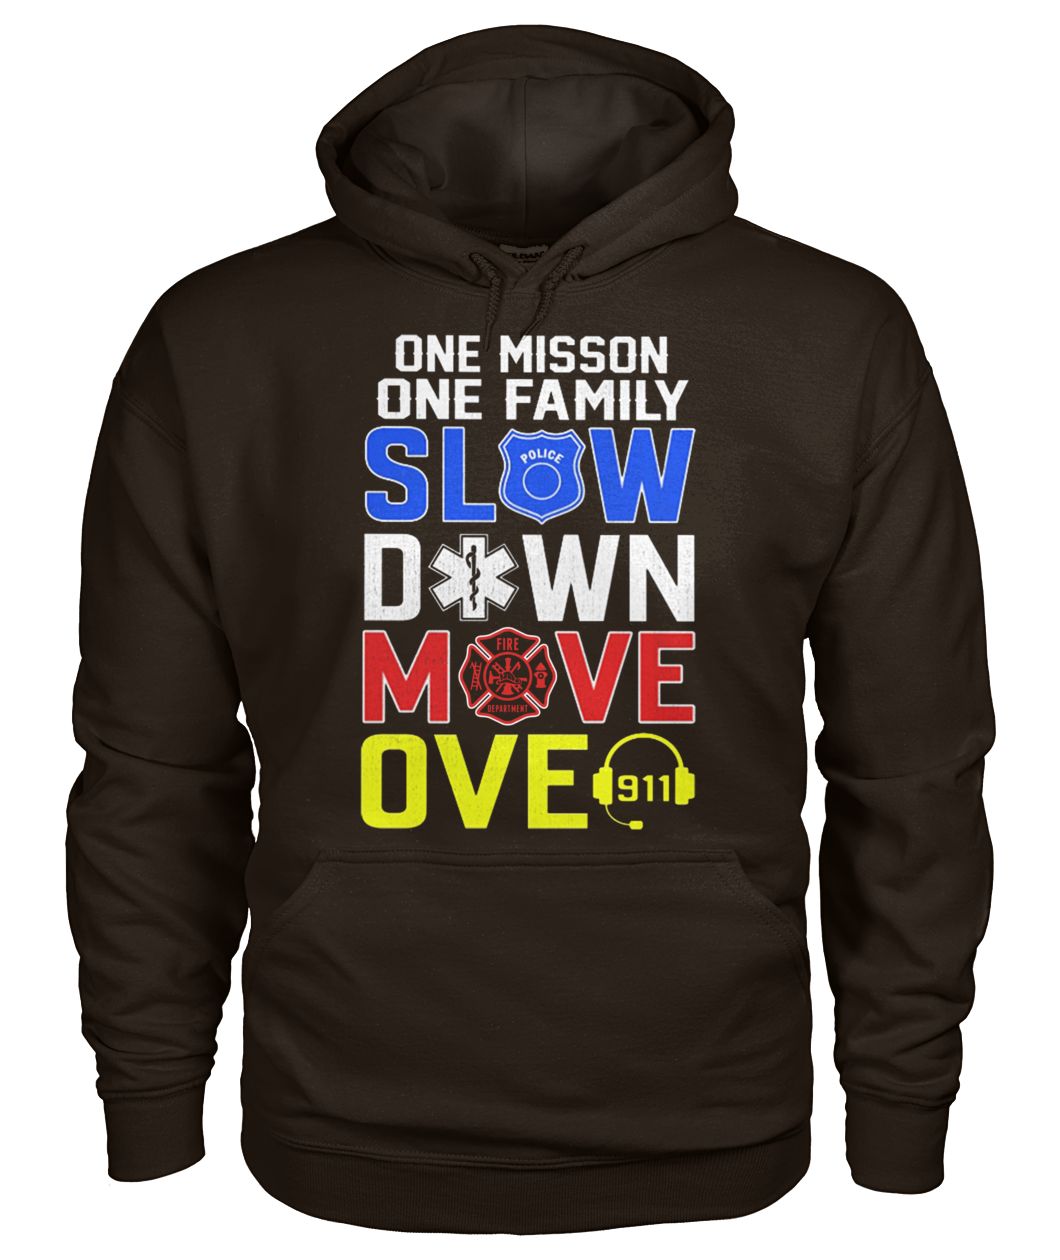 One misson one family slow down move over 911 gildan hoodie